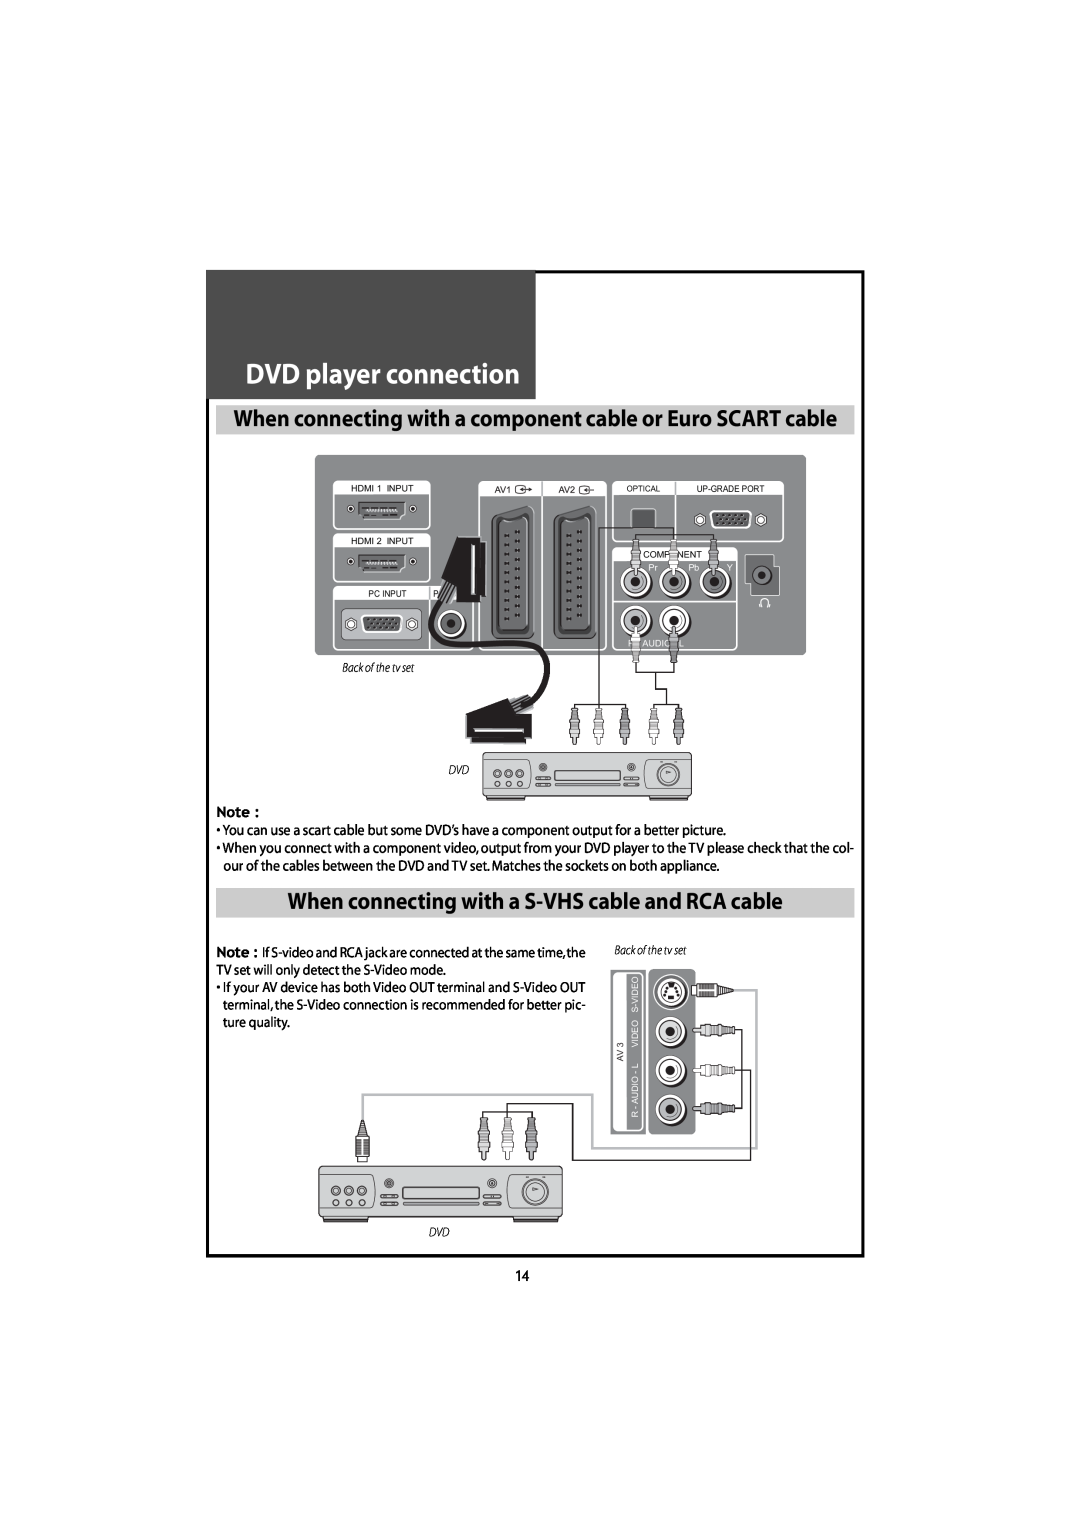 Daewoo DLT-46U1HZ, DLT-42U1/G1FH DVD player connection, When connecting with a component cable or Euro SCART cable 